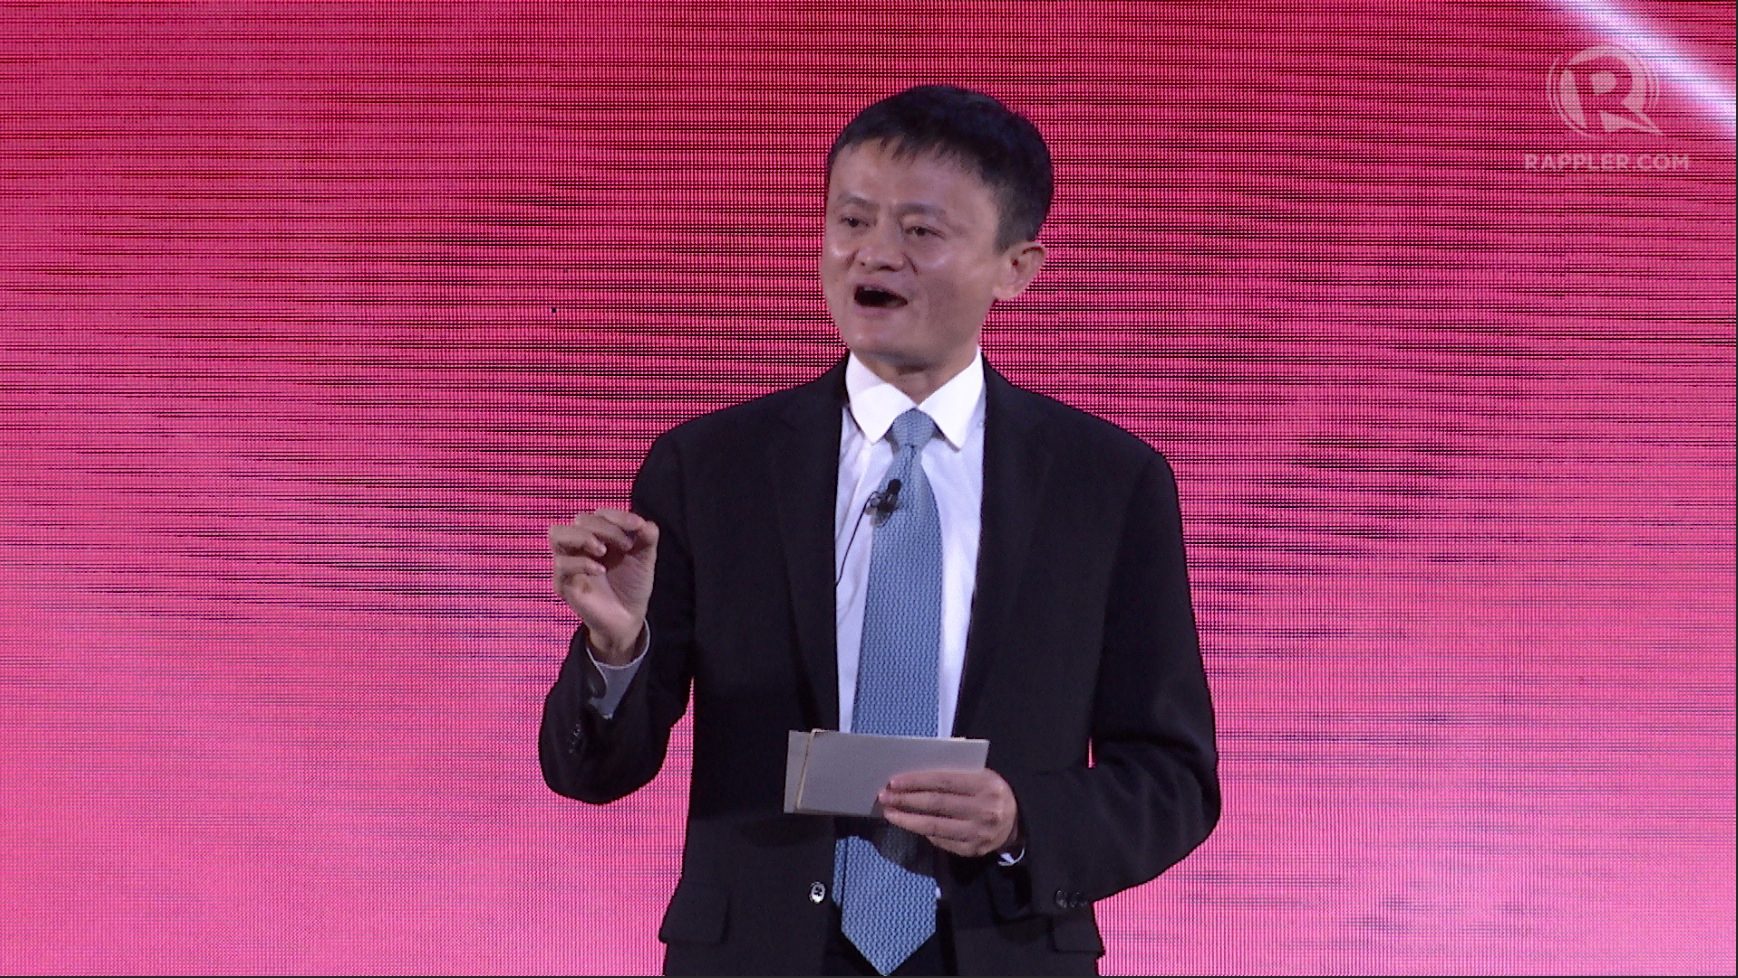 Jack Ma just got a job offer from the Indonesian government, but it’s complicated